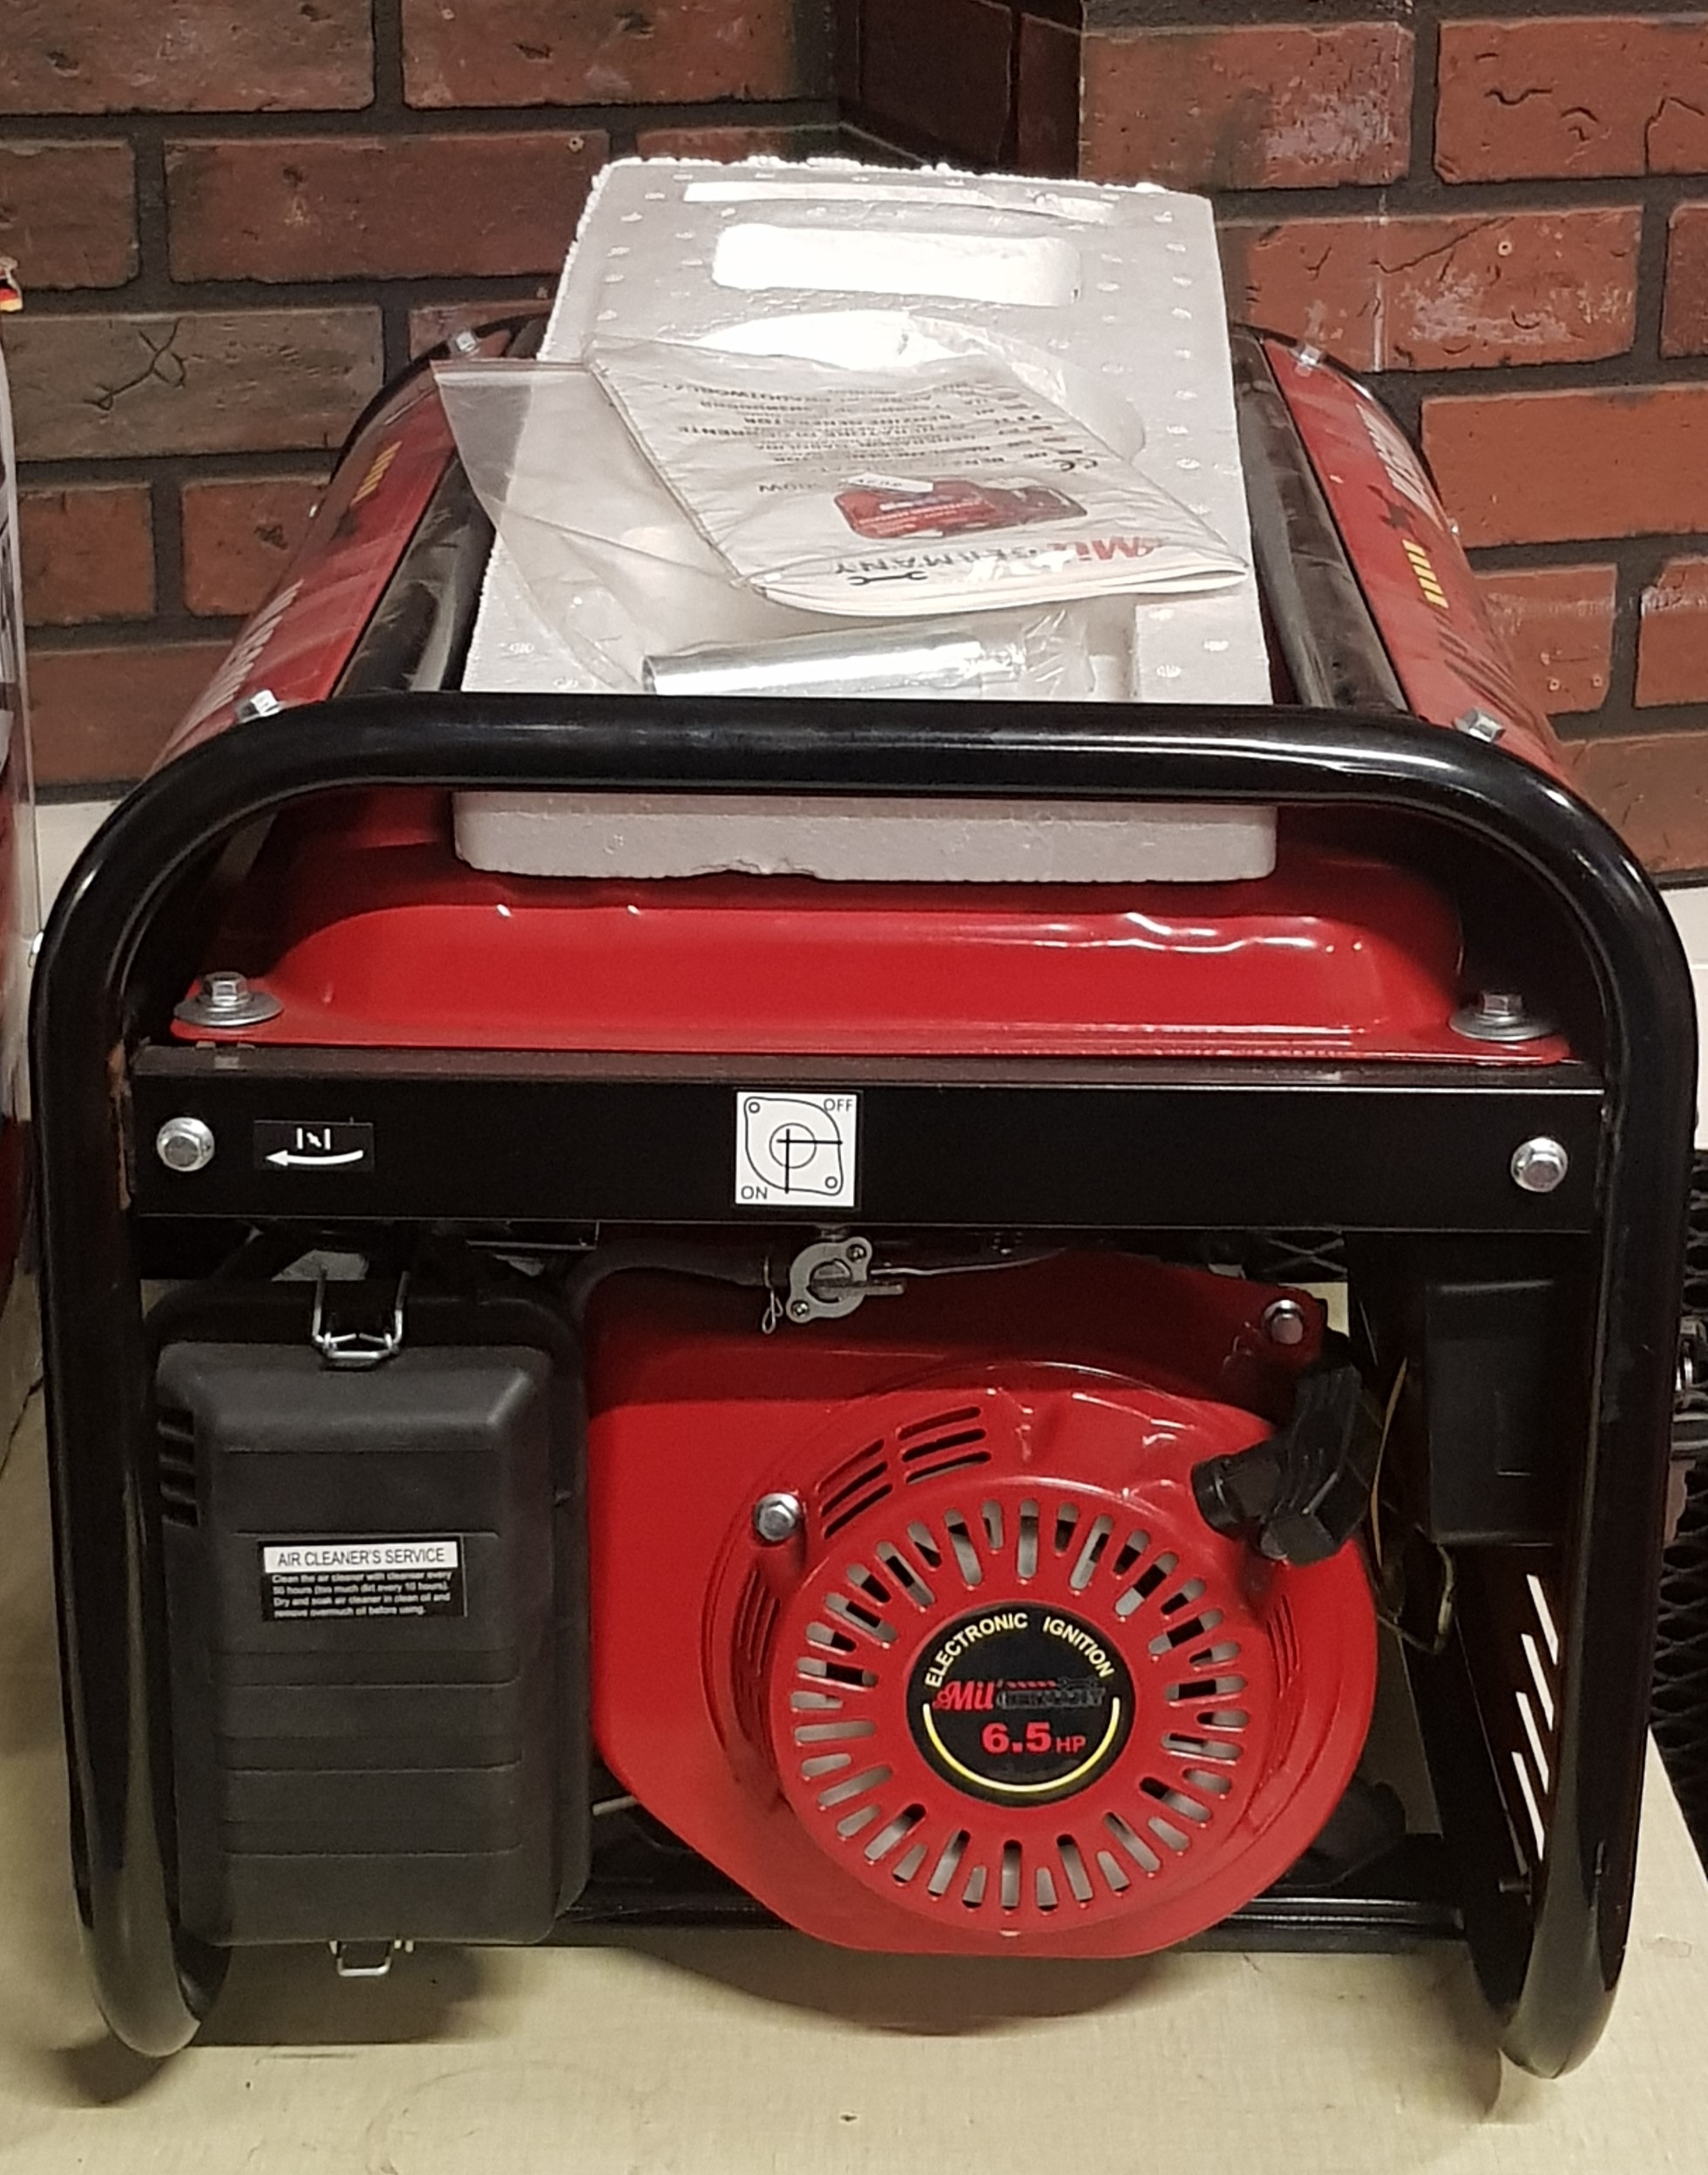 A Mil Germany ML8500W petrol generator, unused, with manual, boxed - Image 3 of 3